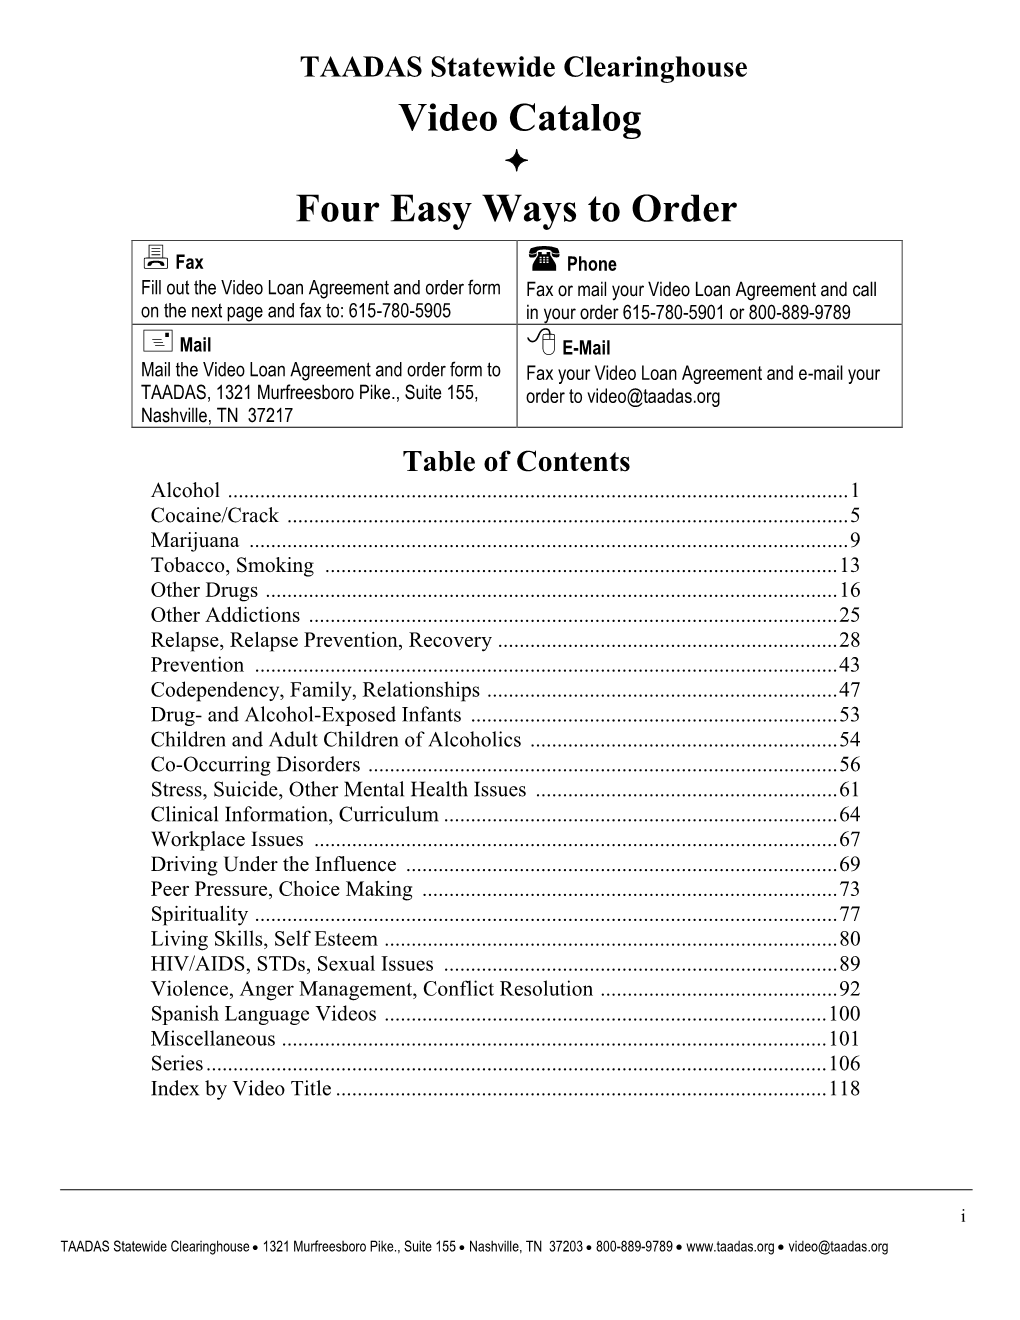 TAADAS Statewide Clearinghouse Video Catalog  Four Easy Ways to Order